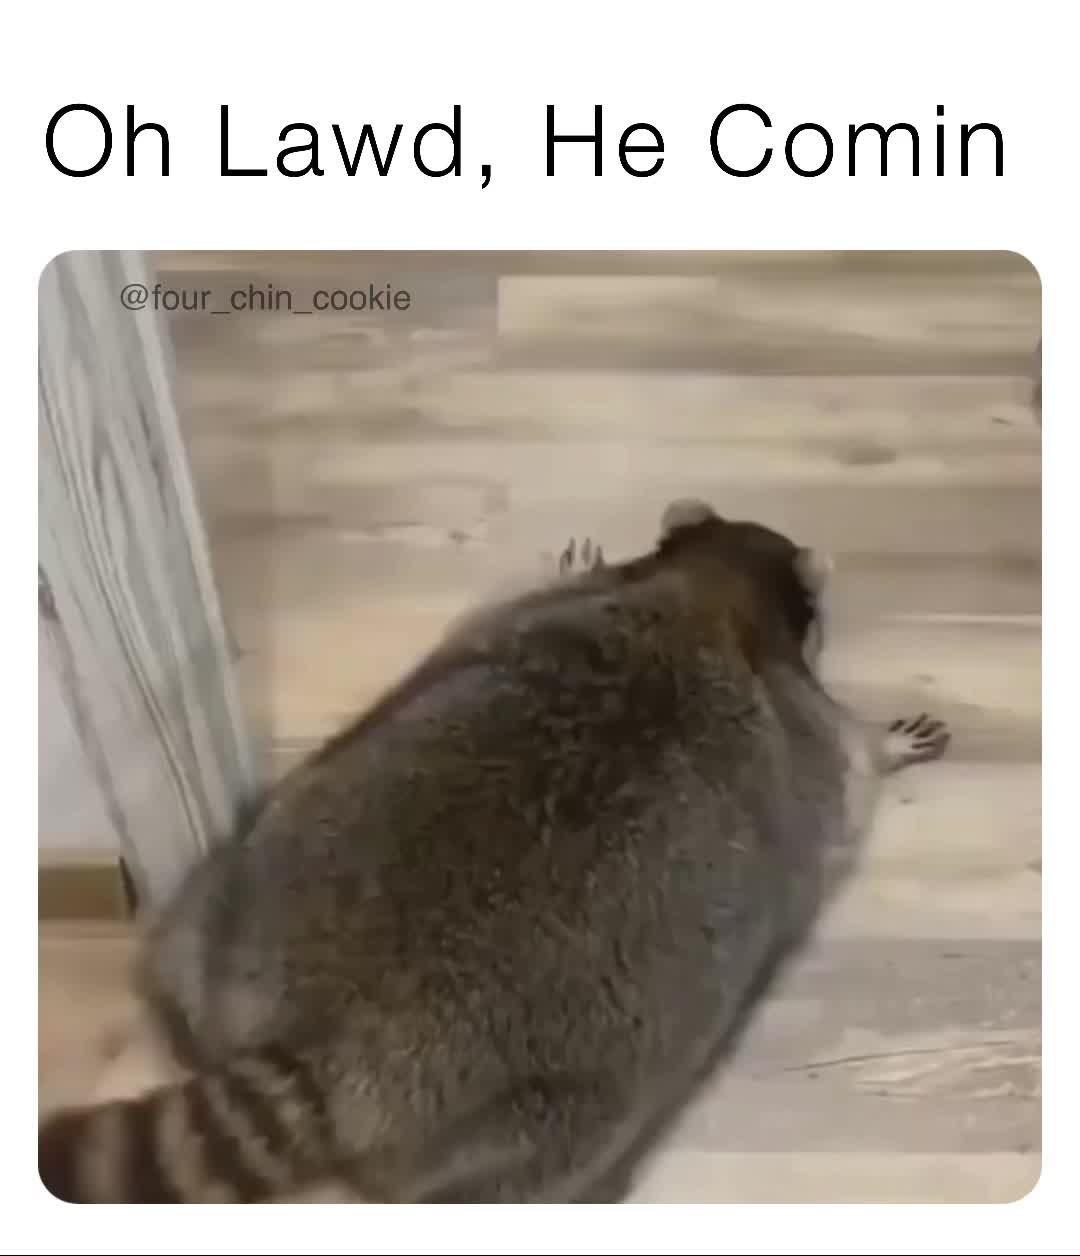 Oh Lawd He Comin Fourchincookie Memes 